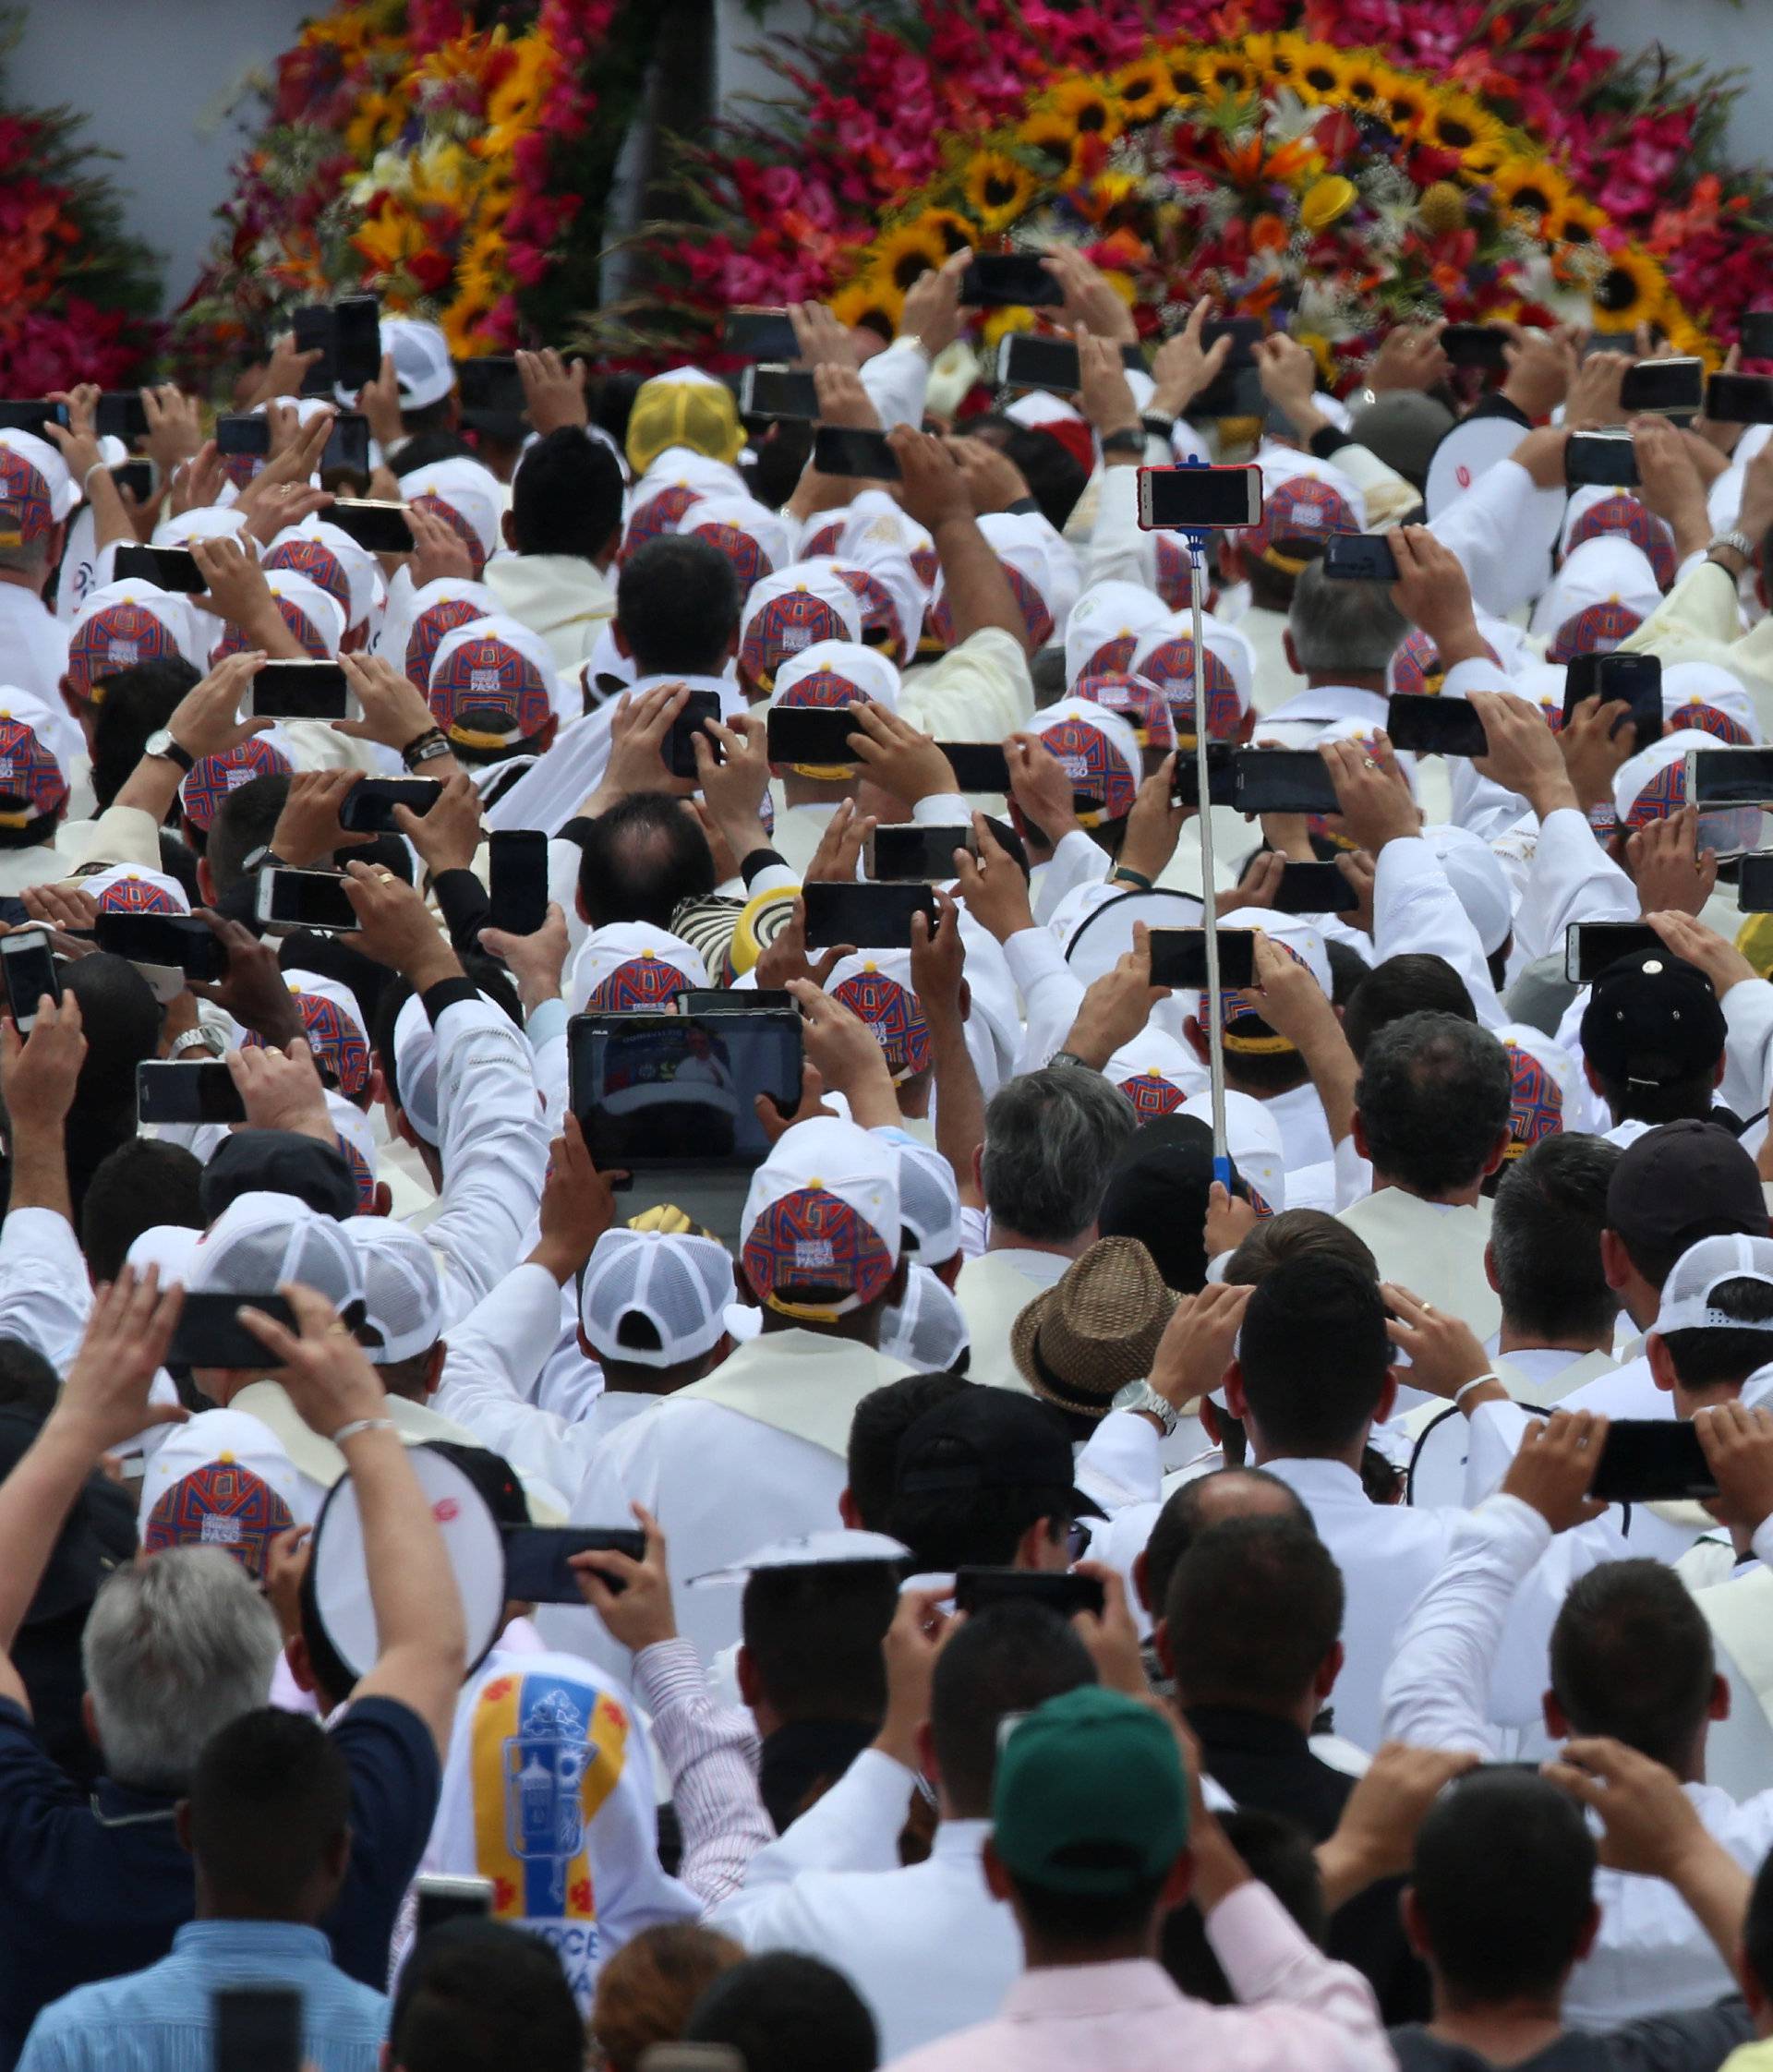 Faithful use their mobile devices as Pope Francis arrives on the popemobile for a holy mass at Enrique Olaya Herrera airport in Medellin